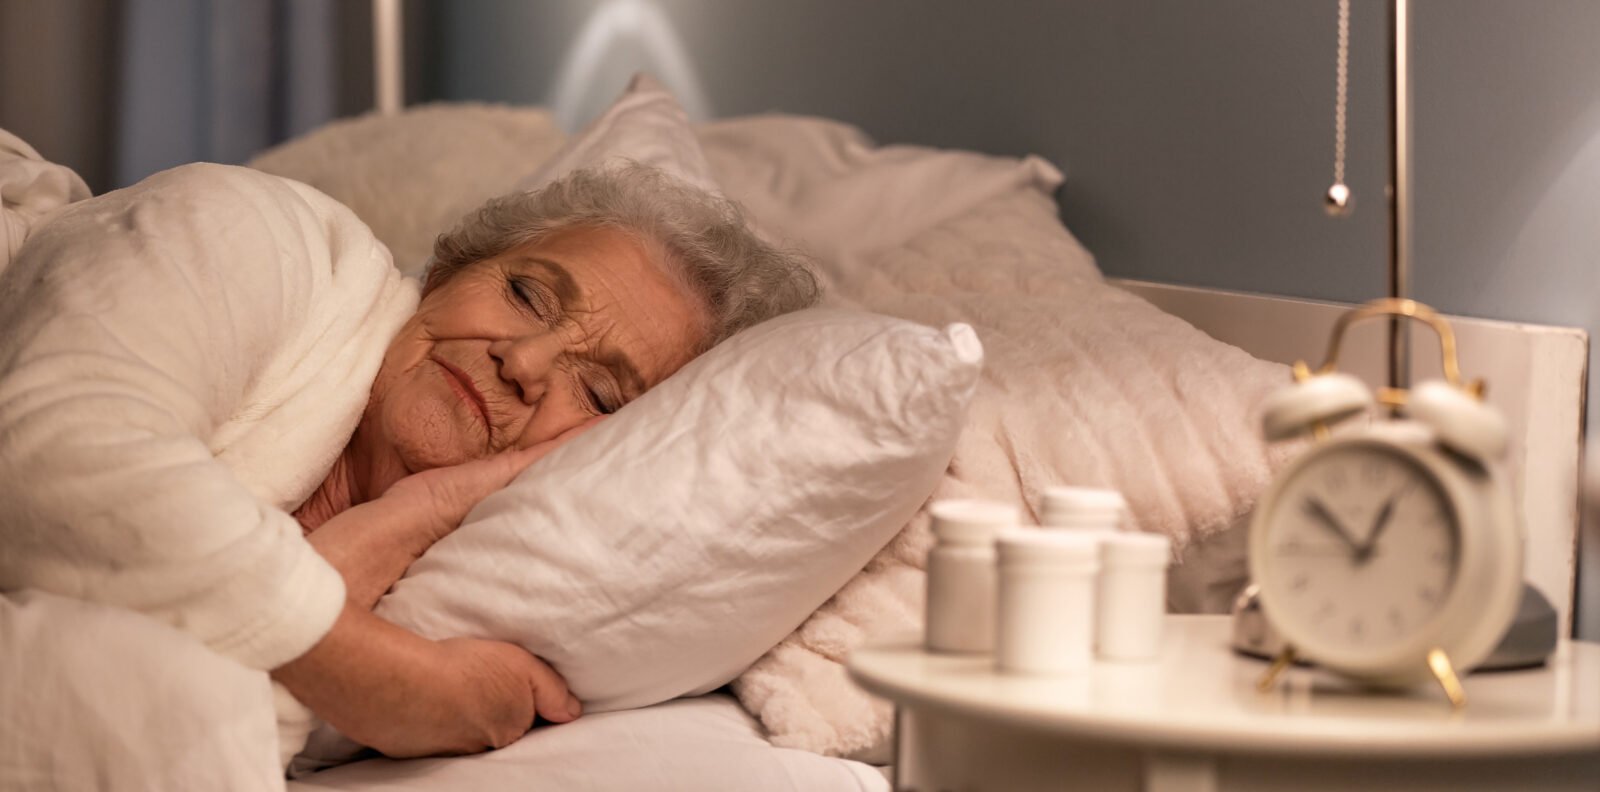 New research examines the connection between sleep medications and dementia symptoms